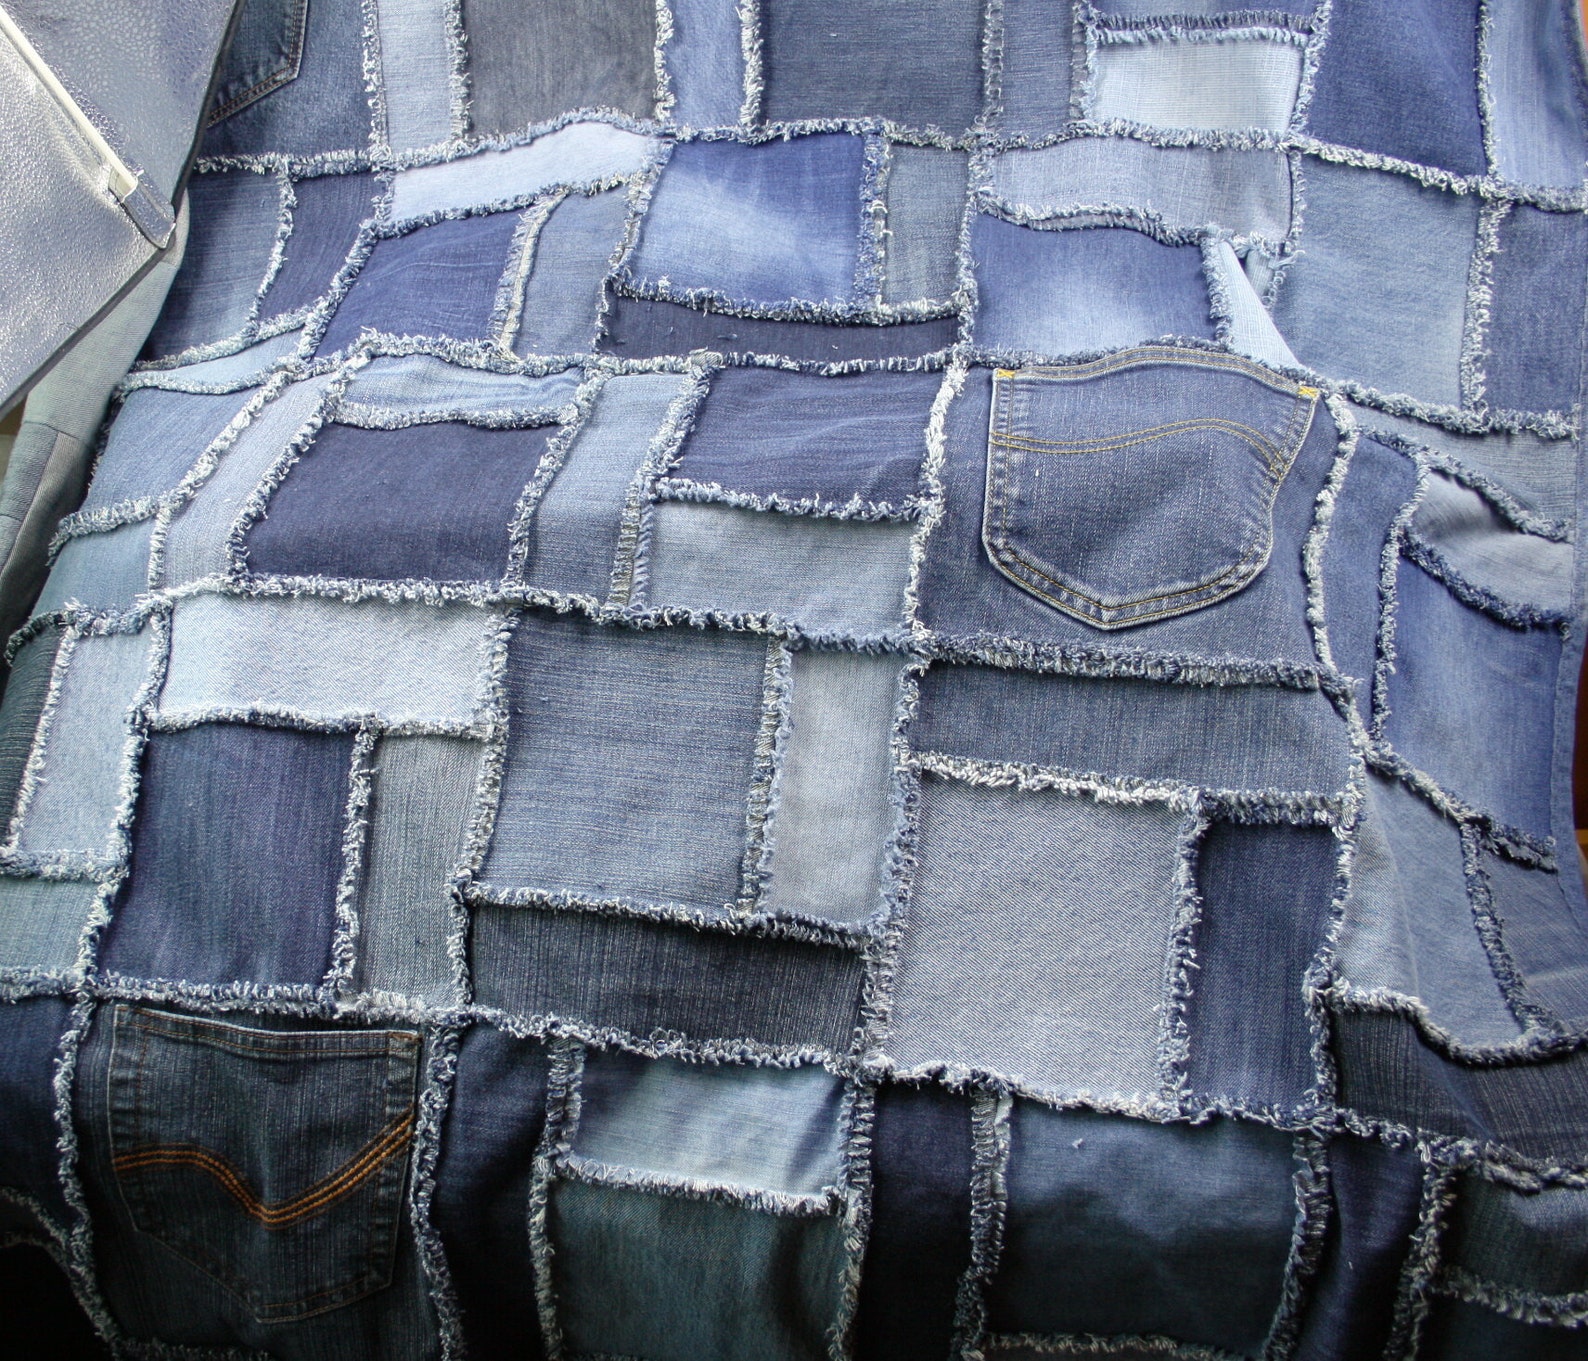 Denim Patchwork Rag Quilt Made From Upcycled Jeans Denim - Etsy